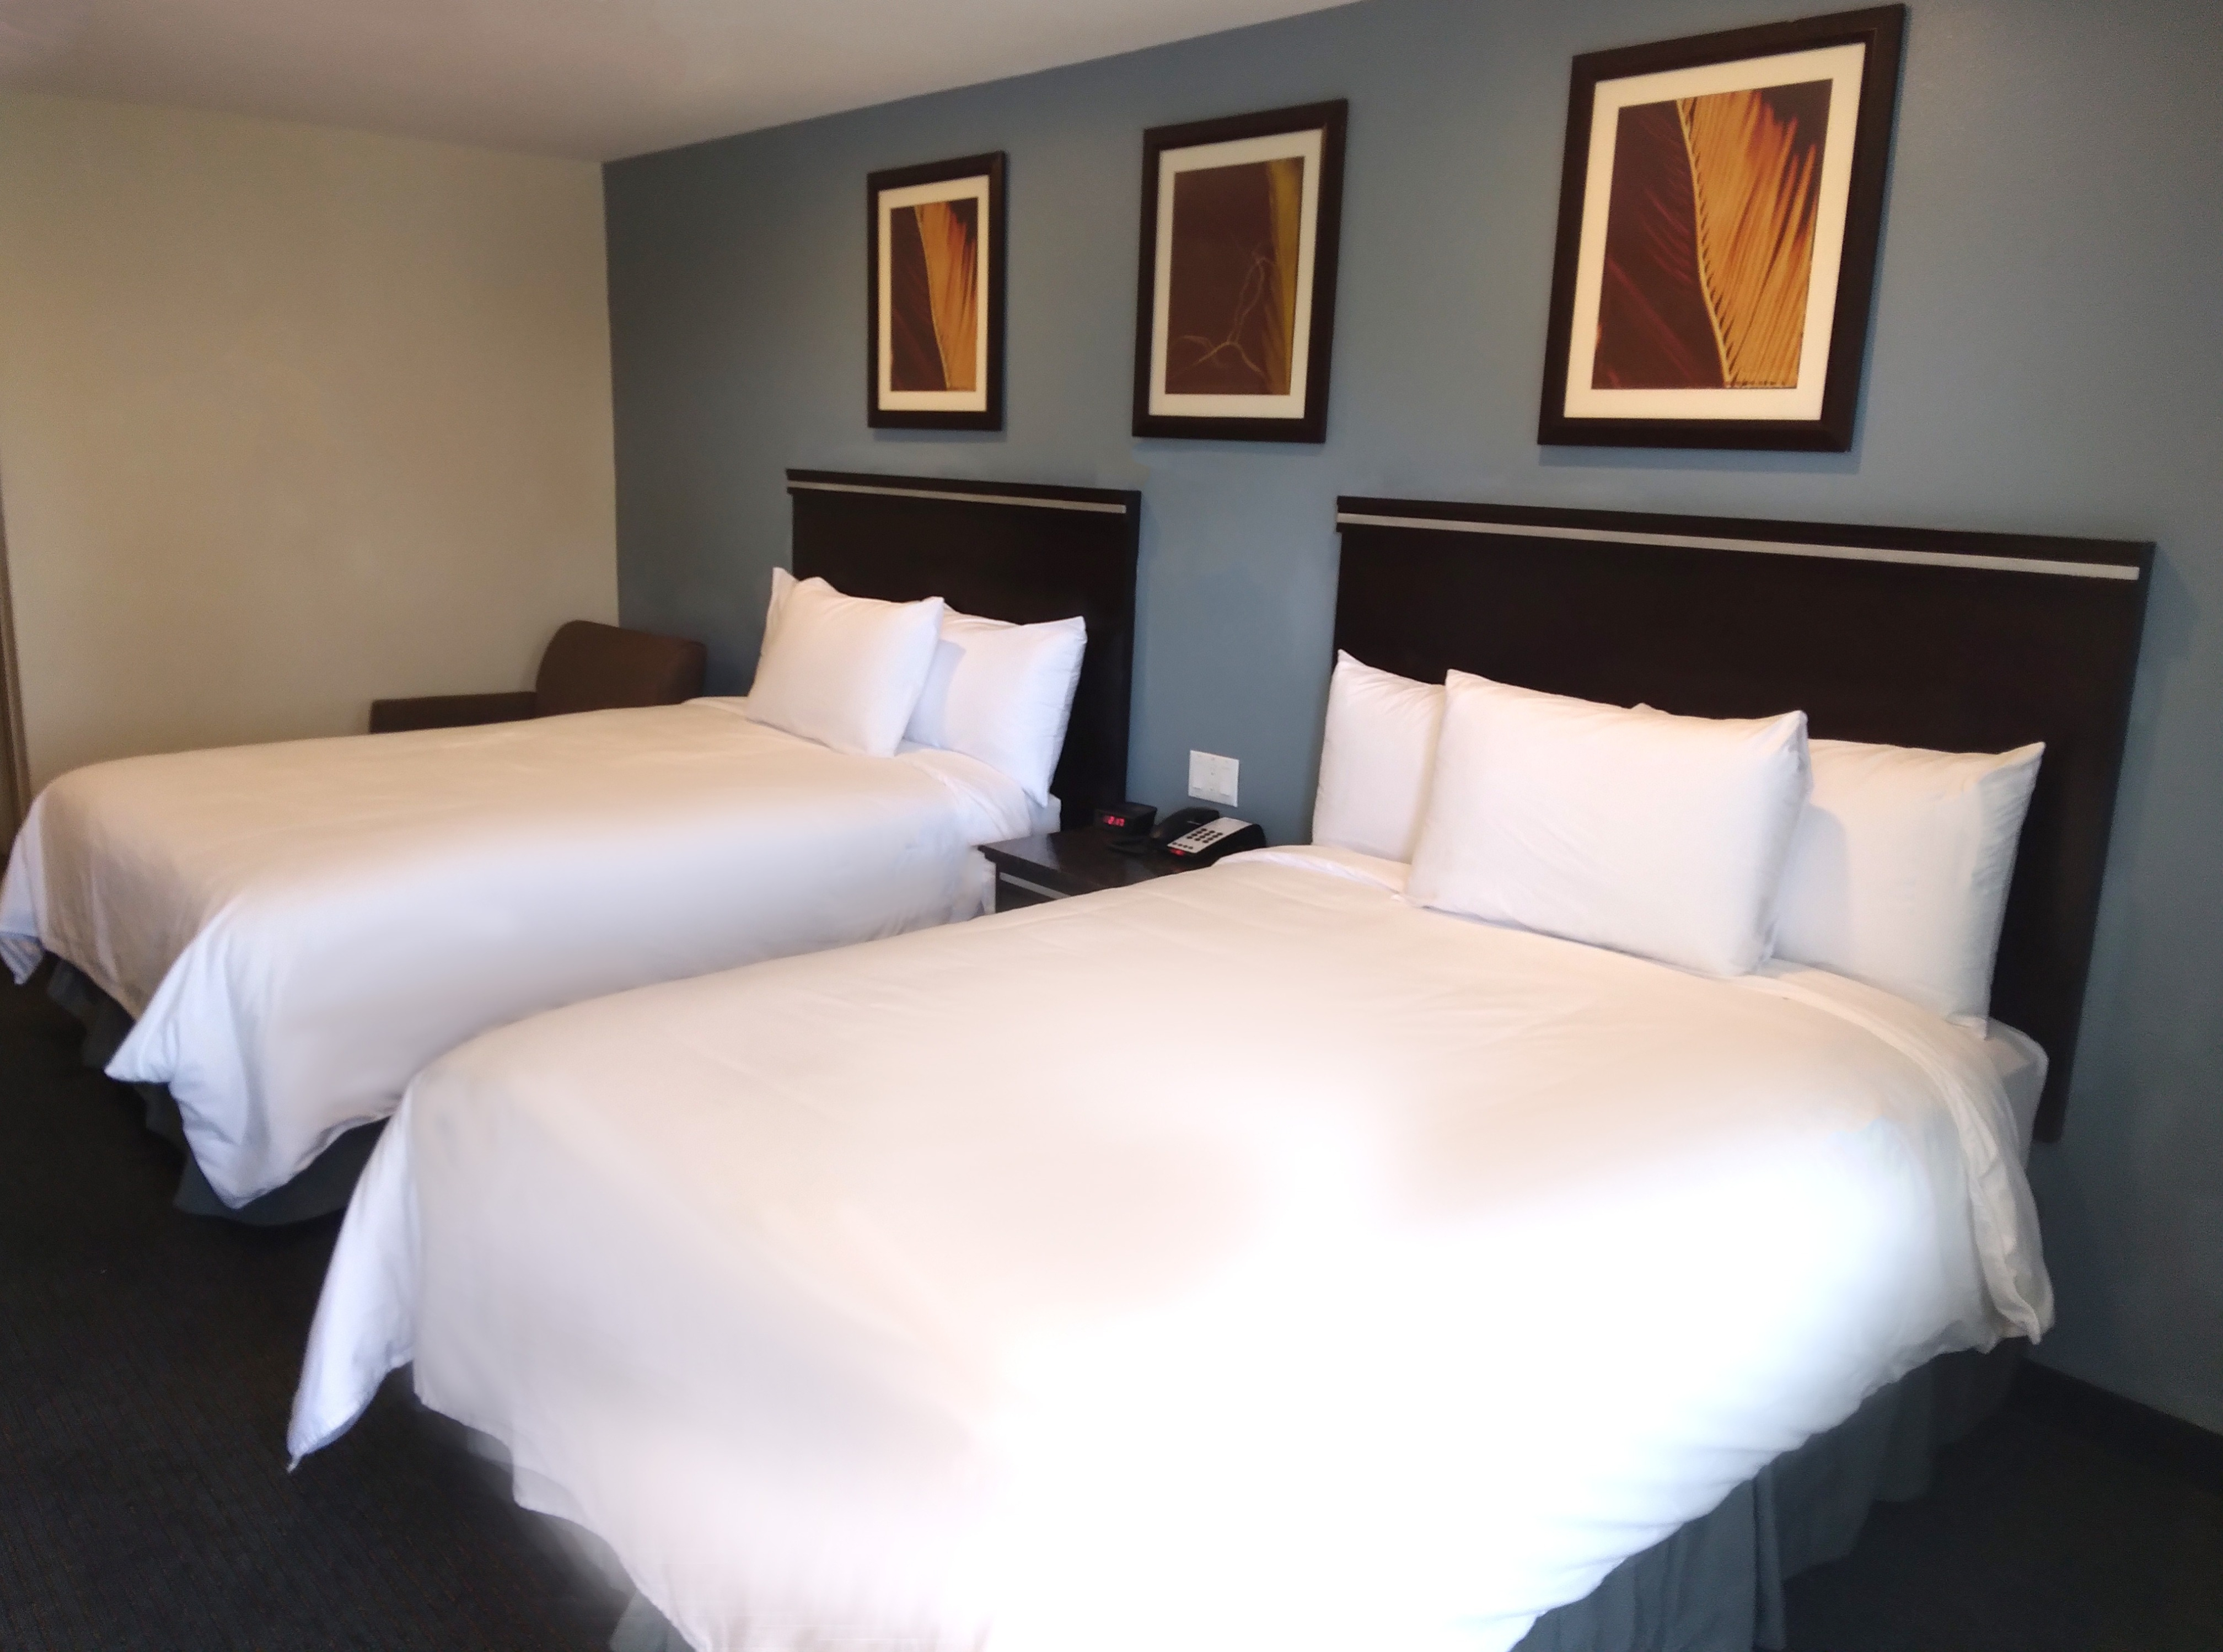 Secure comforting sleep with the warmth of plush beddings and linens.